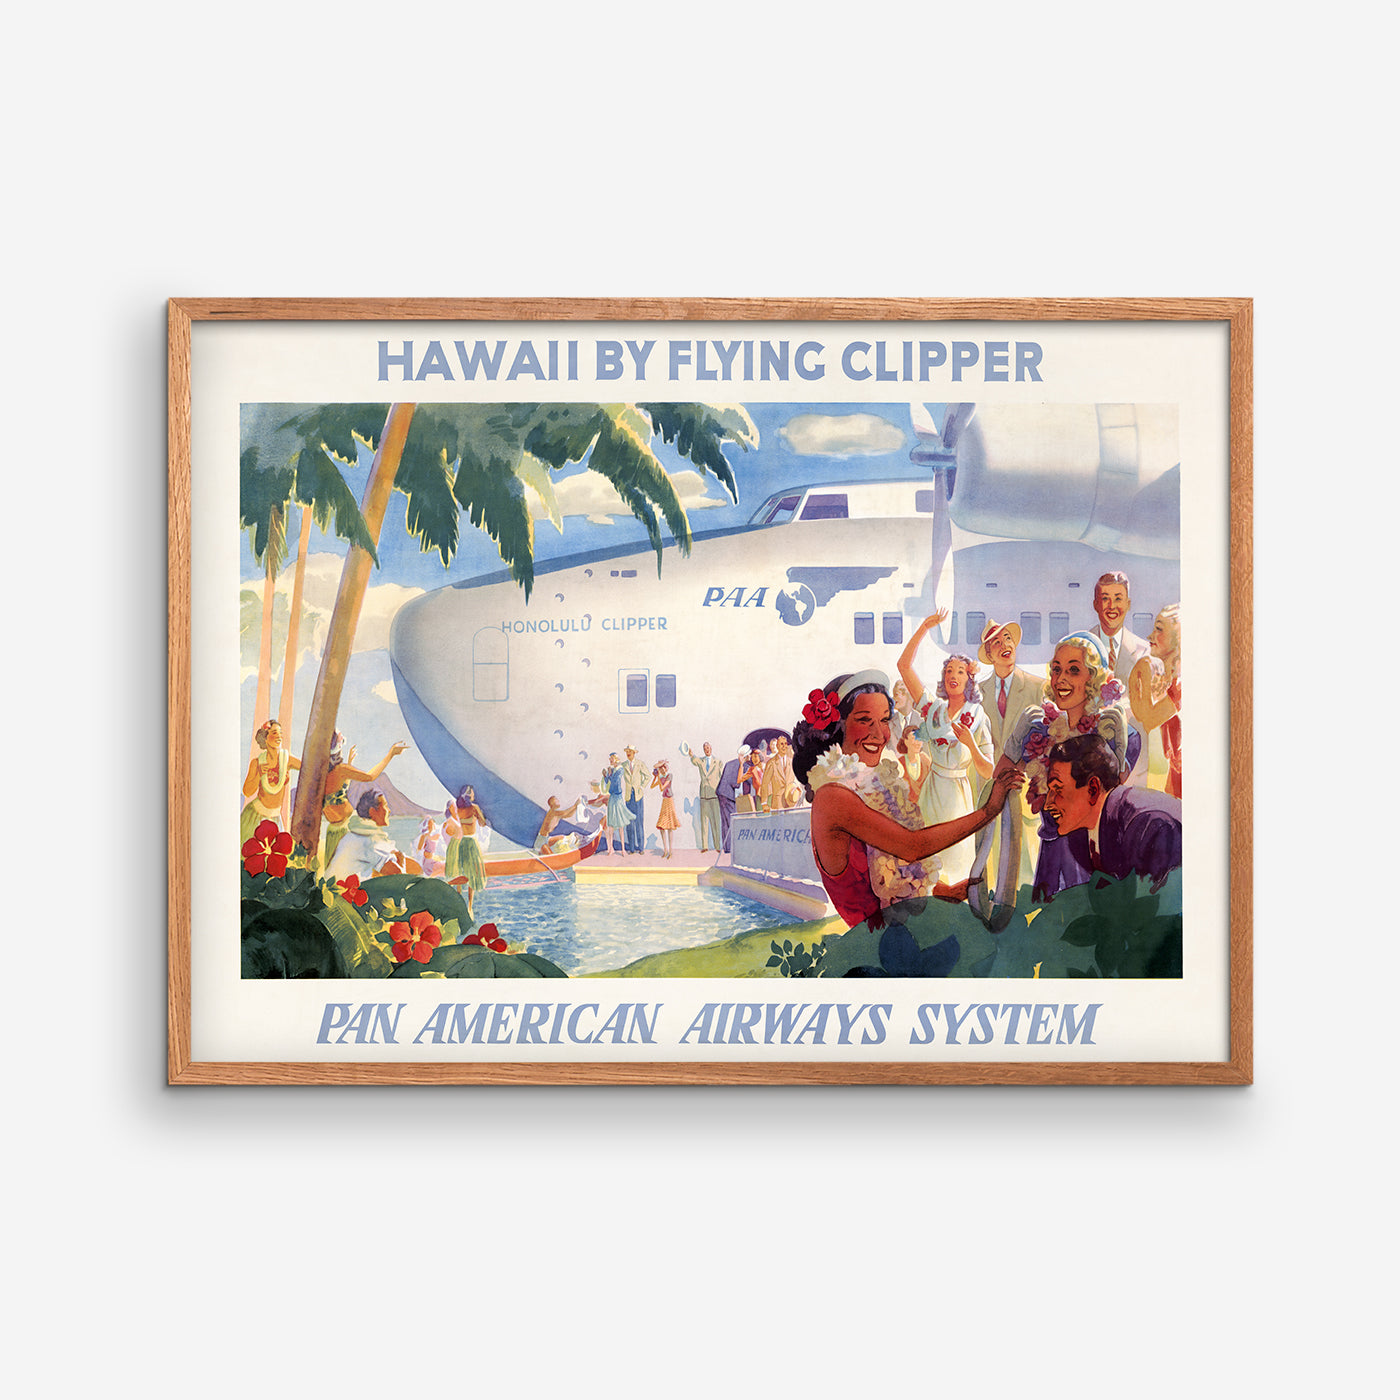 Hawaii city flying clipper--Pan American Airways System, 1938